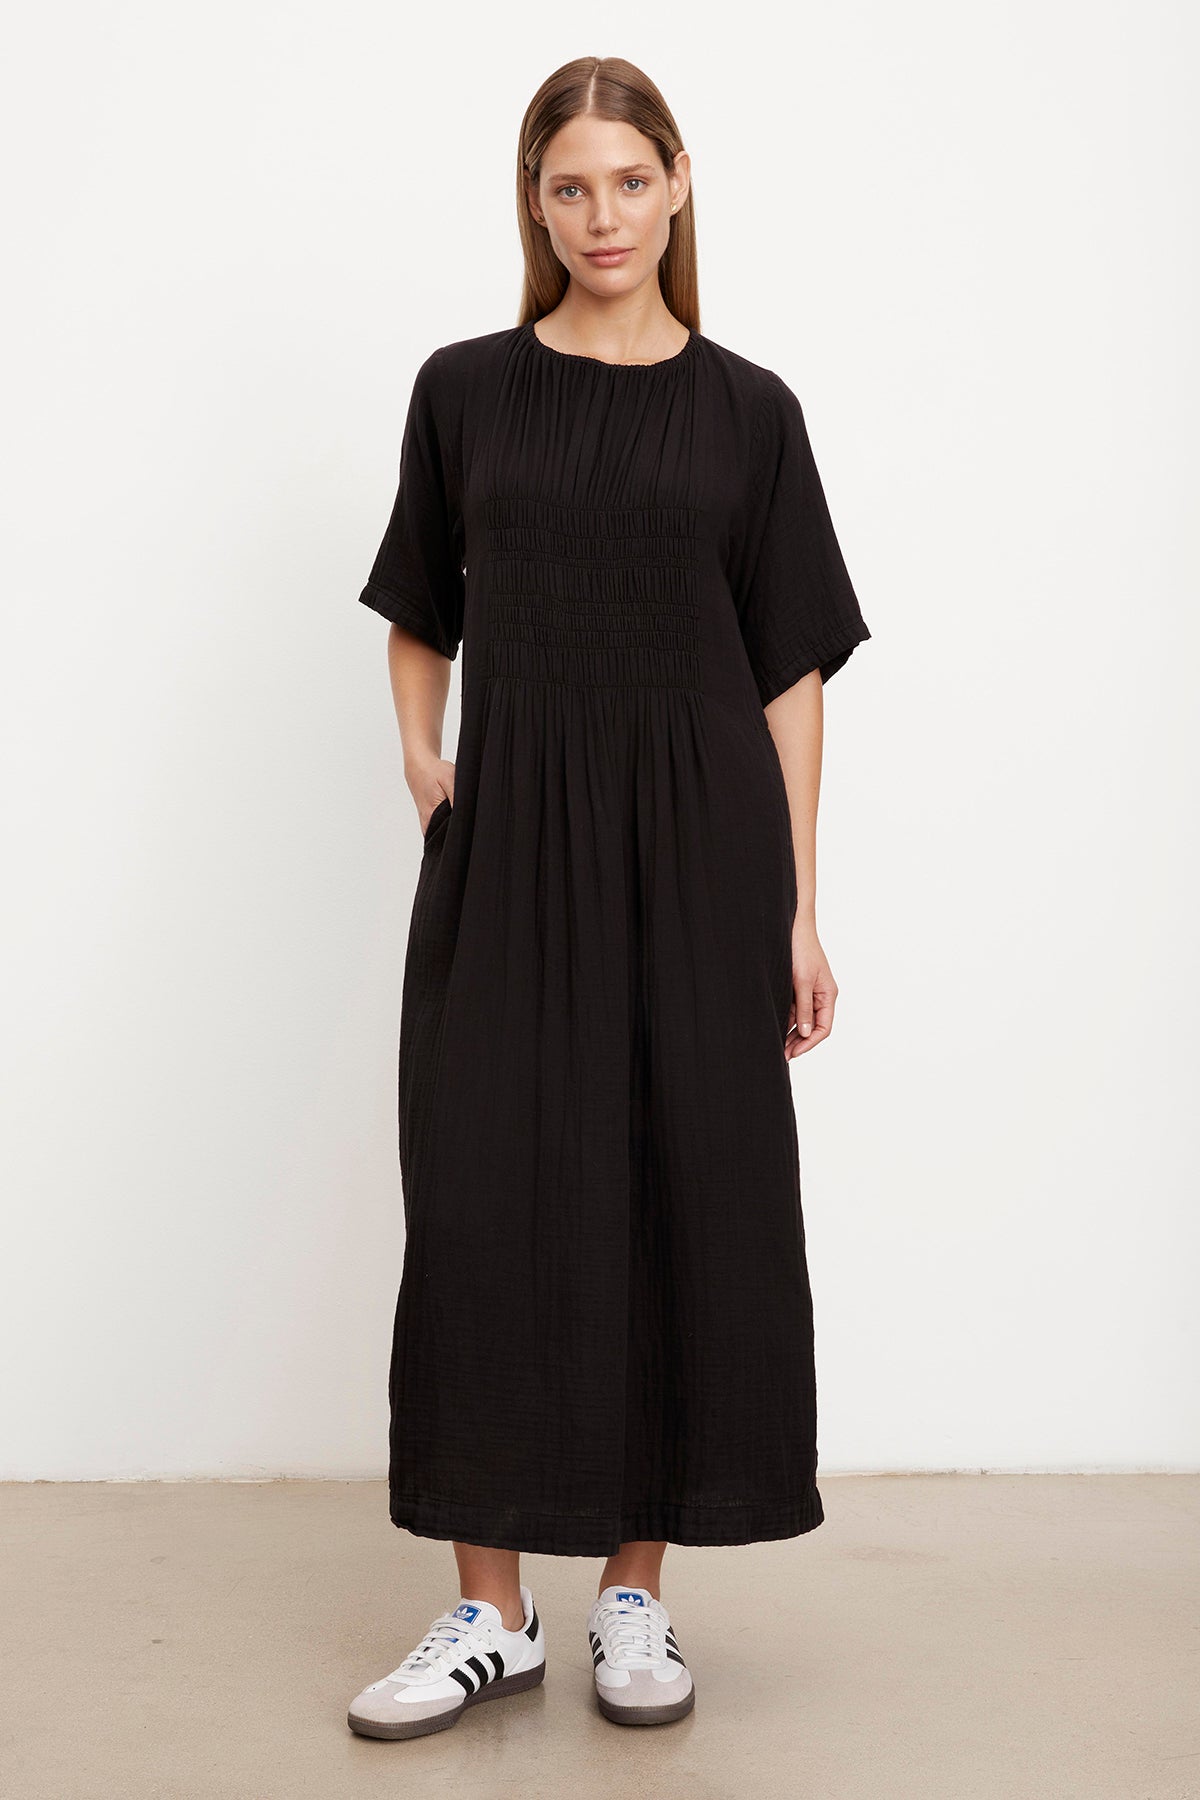 A woman wearing the ASHLEIGH COTTON GAUZE MAXI DRESS by Velvet by Graham & Spencer.-35702048358593